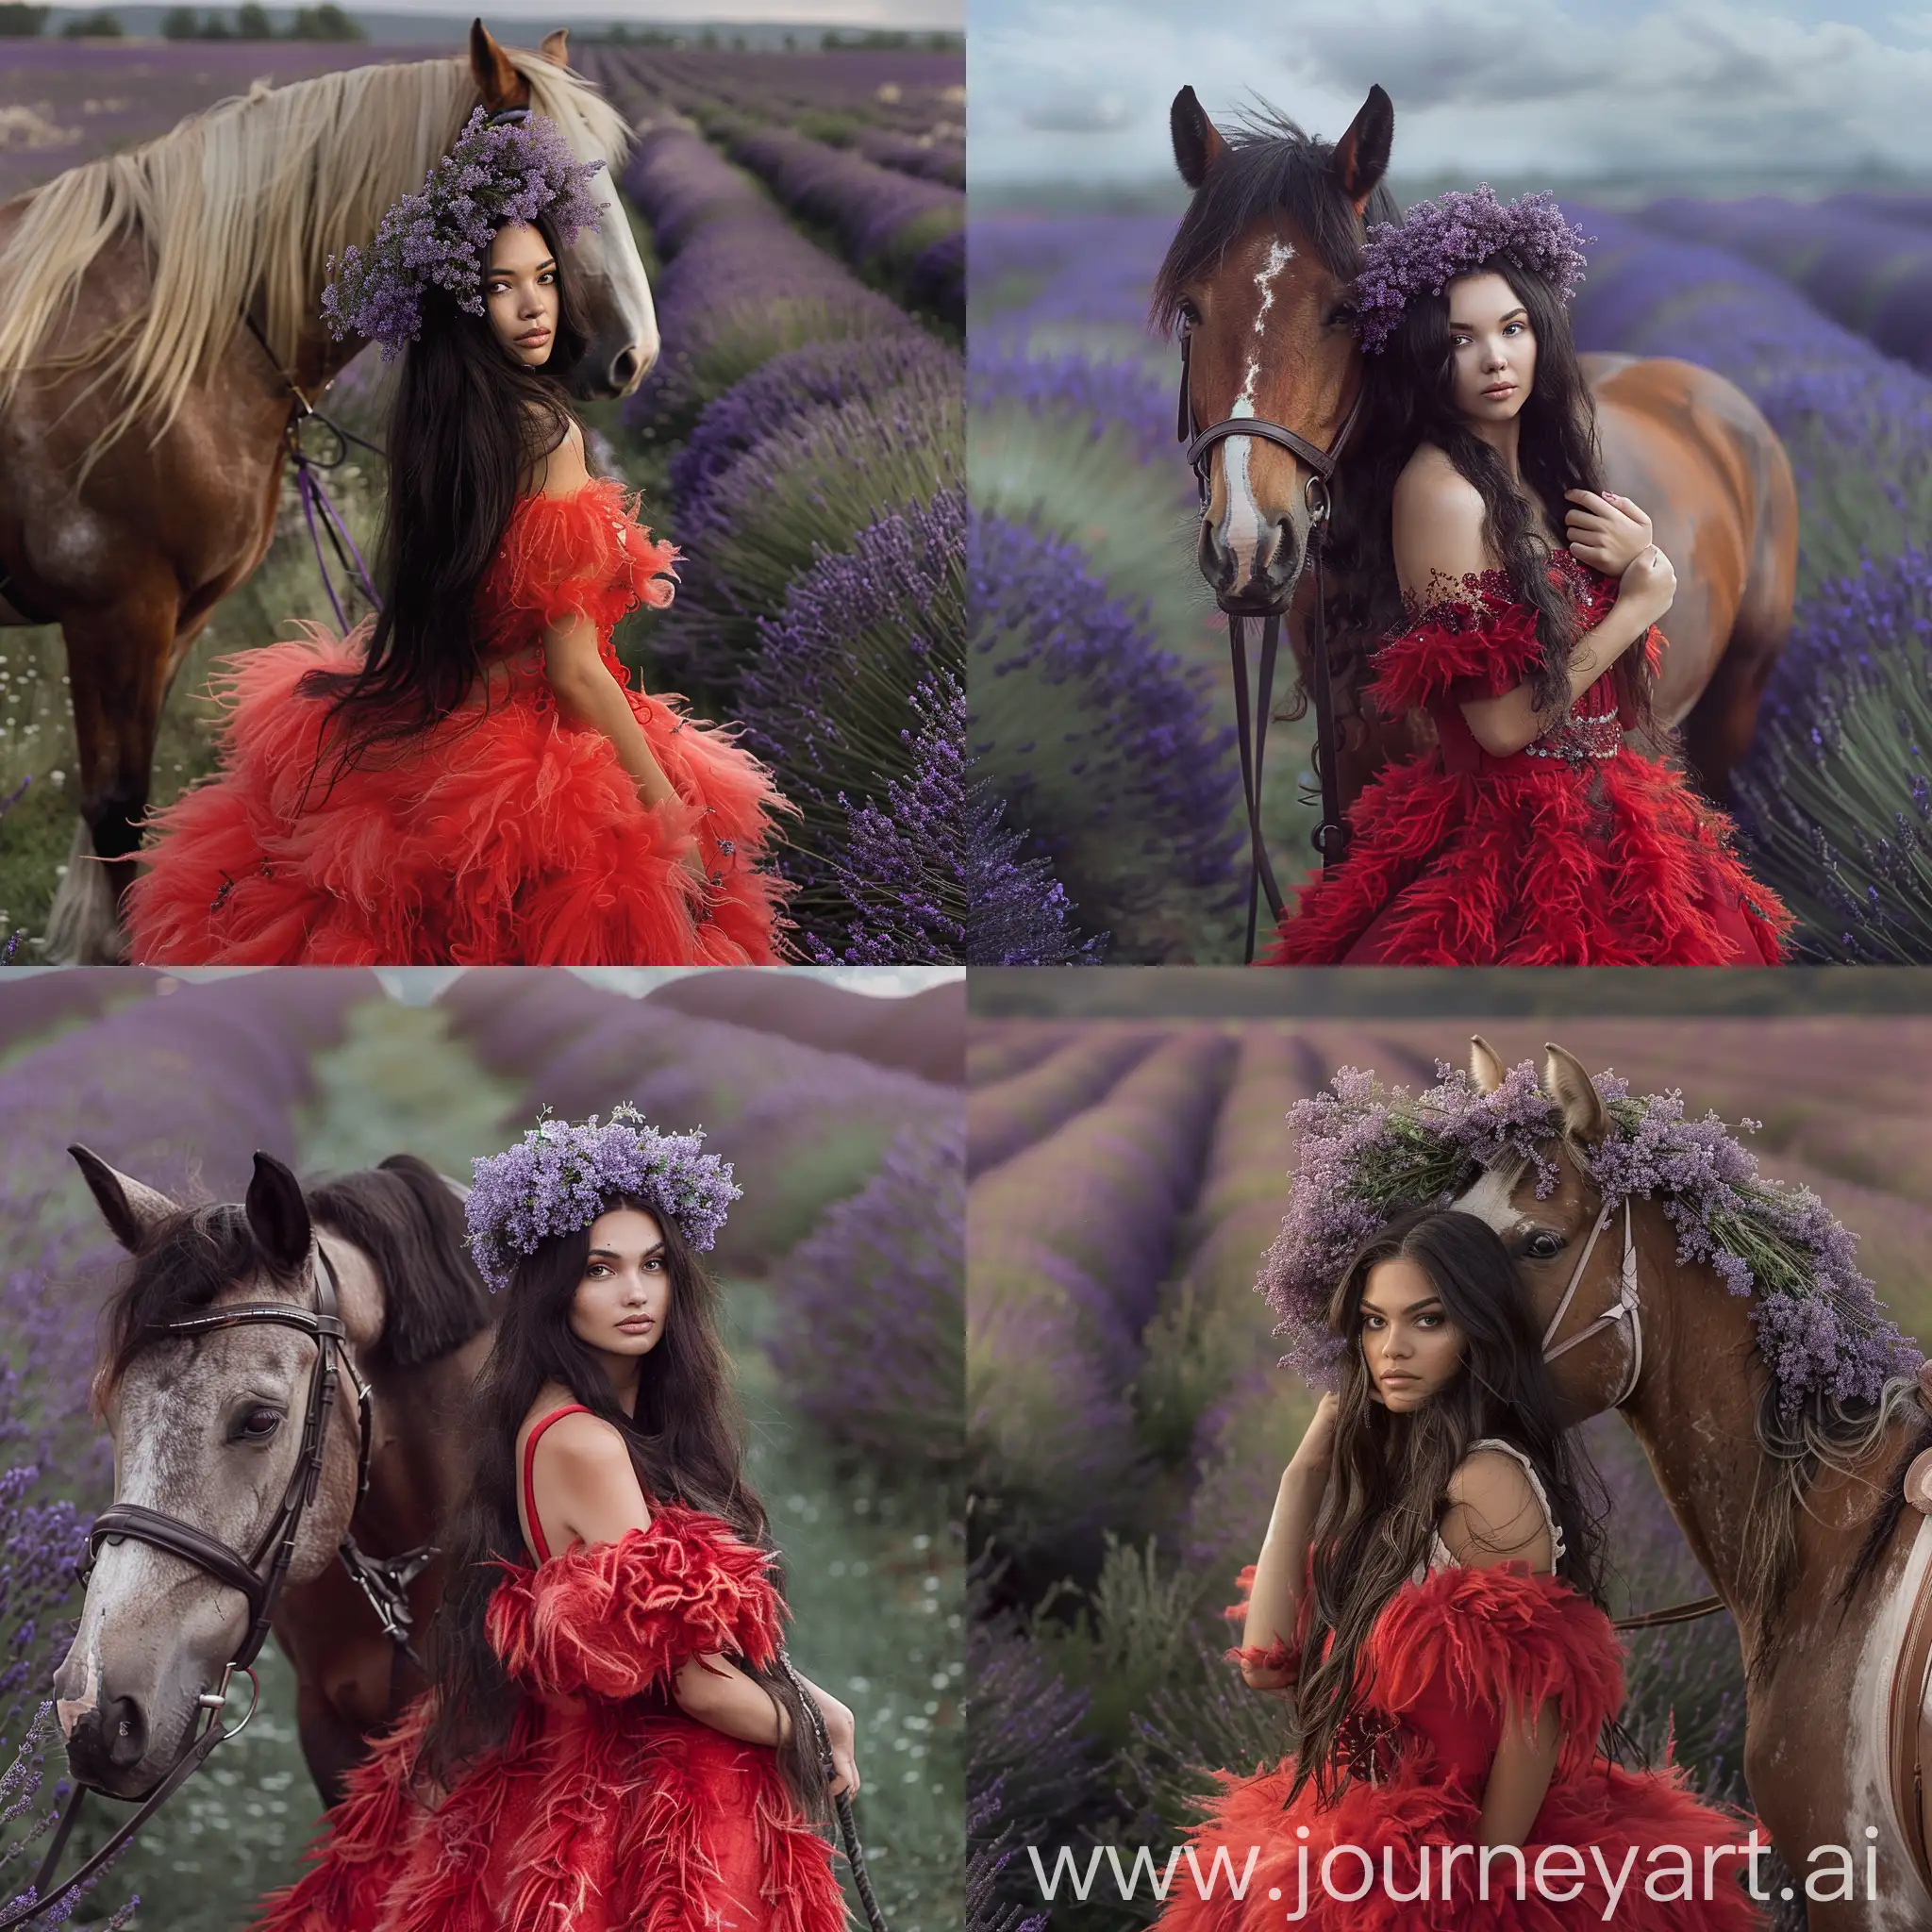 Enchanting-Woman-in-Red-Fluffy-Dress-with-Lilac-Wreath-Beside-Horse-in-Lavender-Field